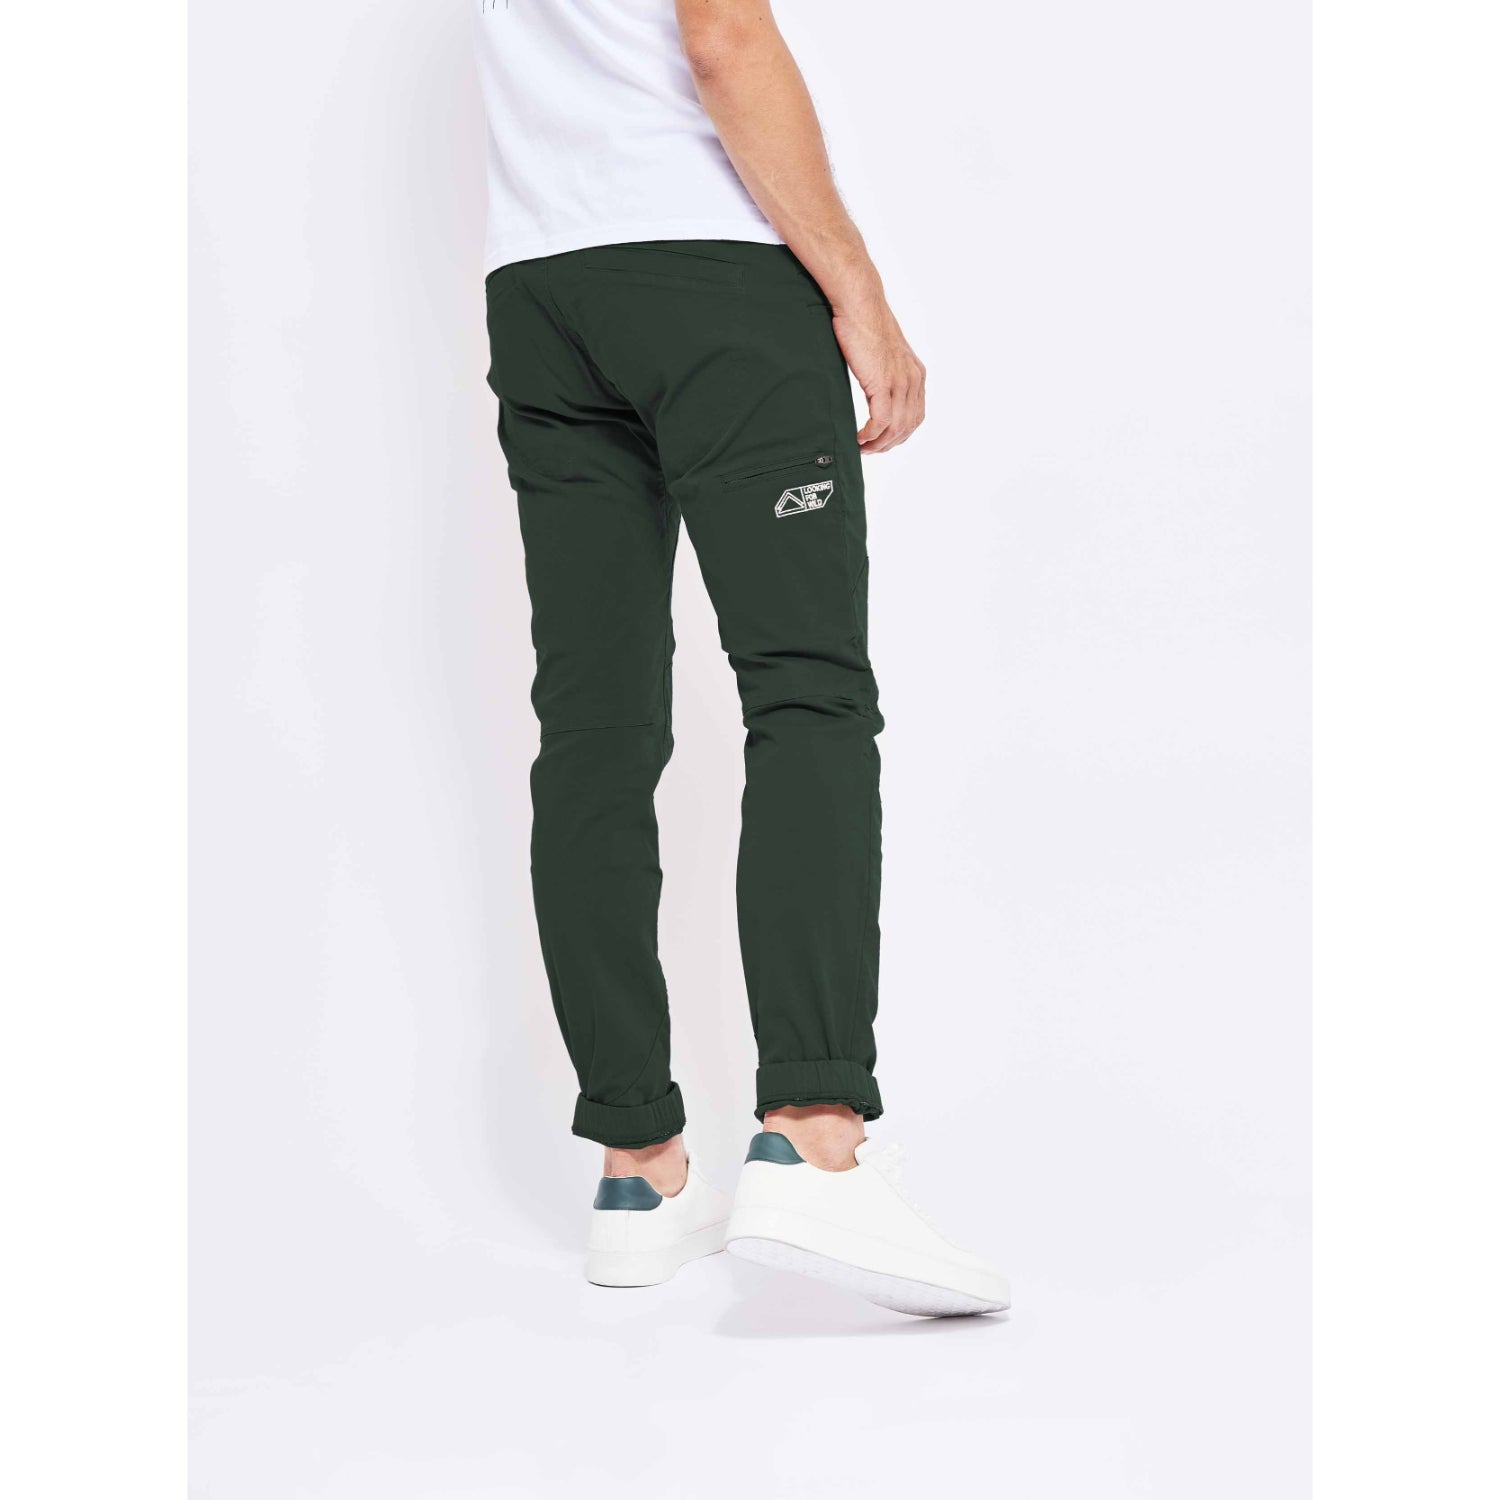 Looking For Wild Fitz Roy Pant - Mens (Deep Forest)